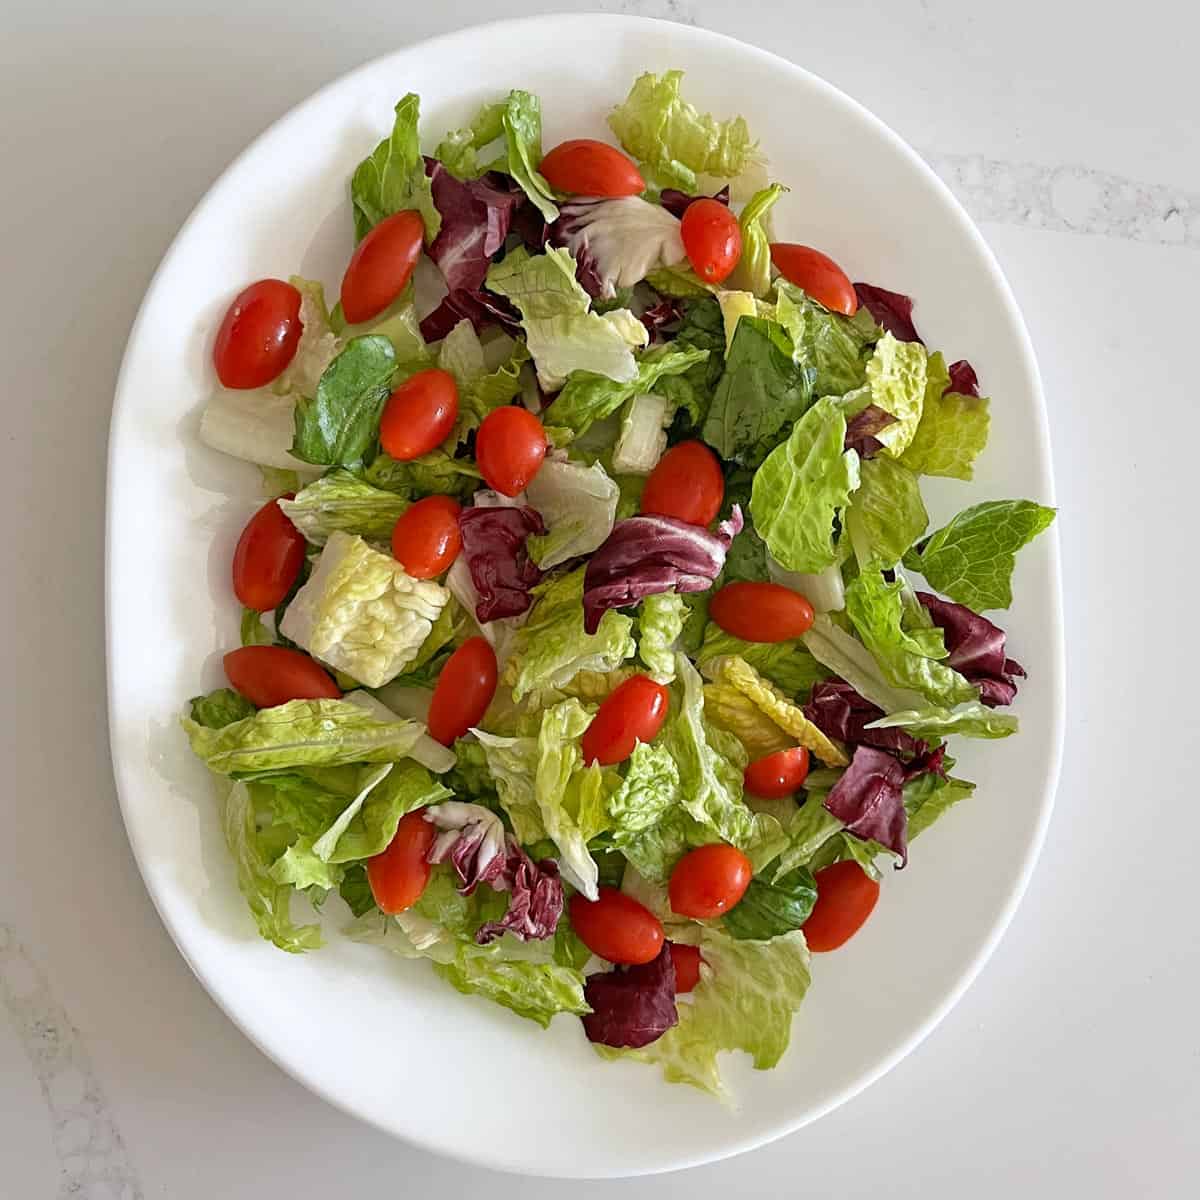 Mixed greens and cherry tomatoes on a white platter.